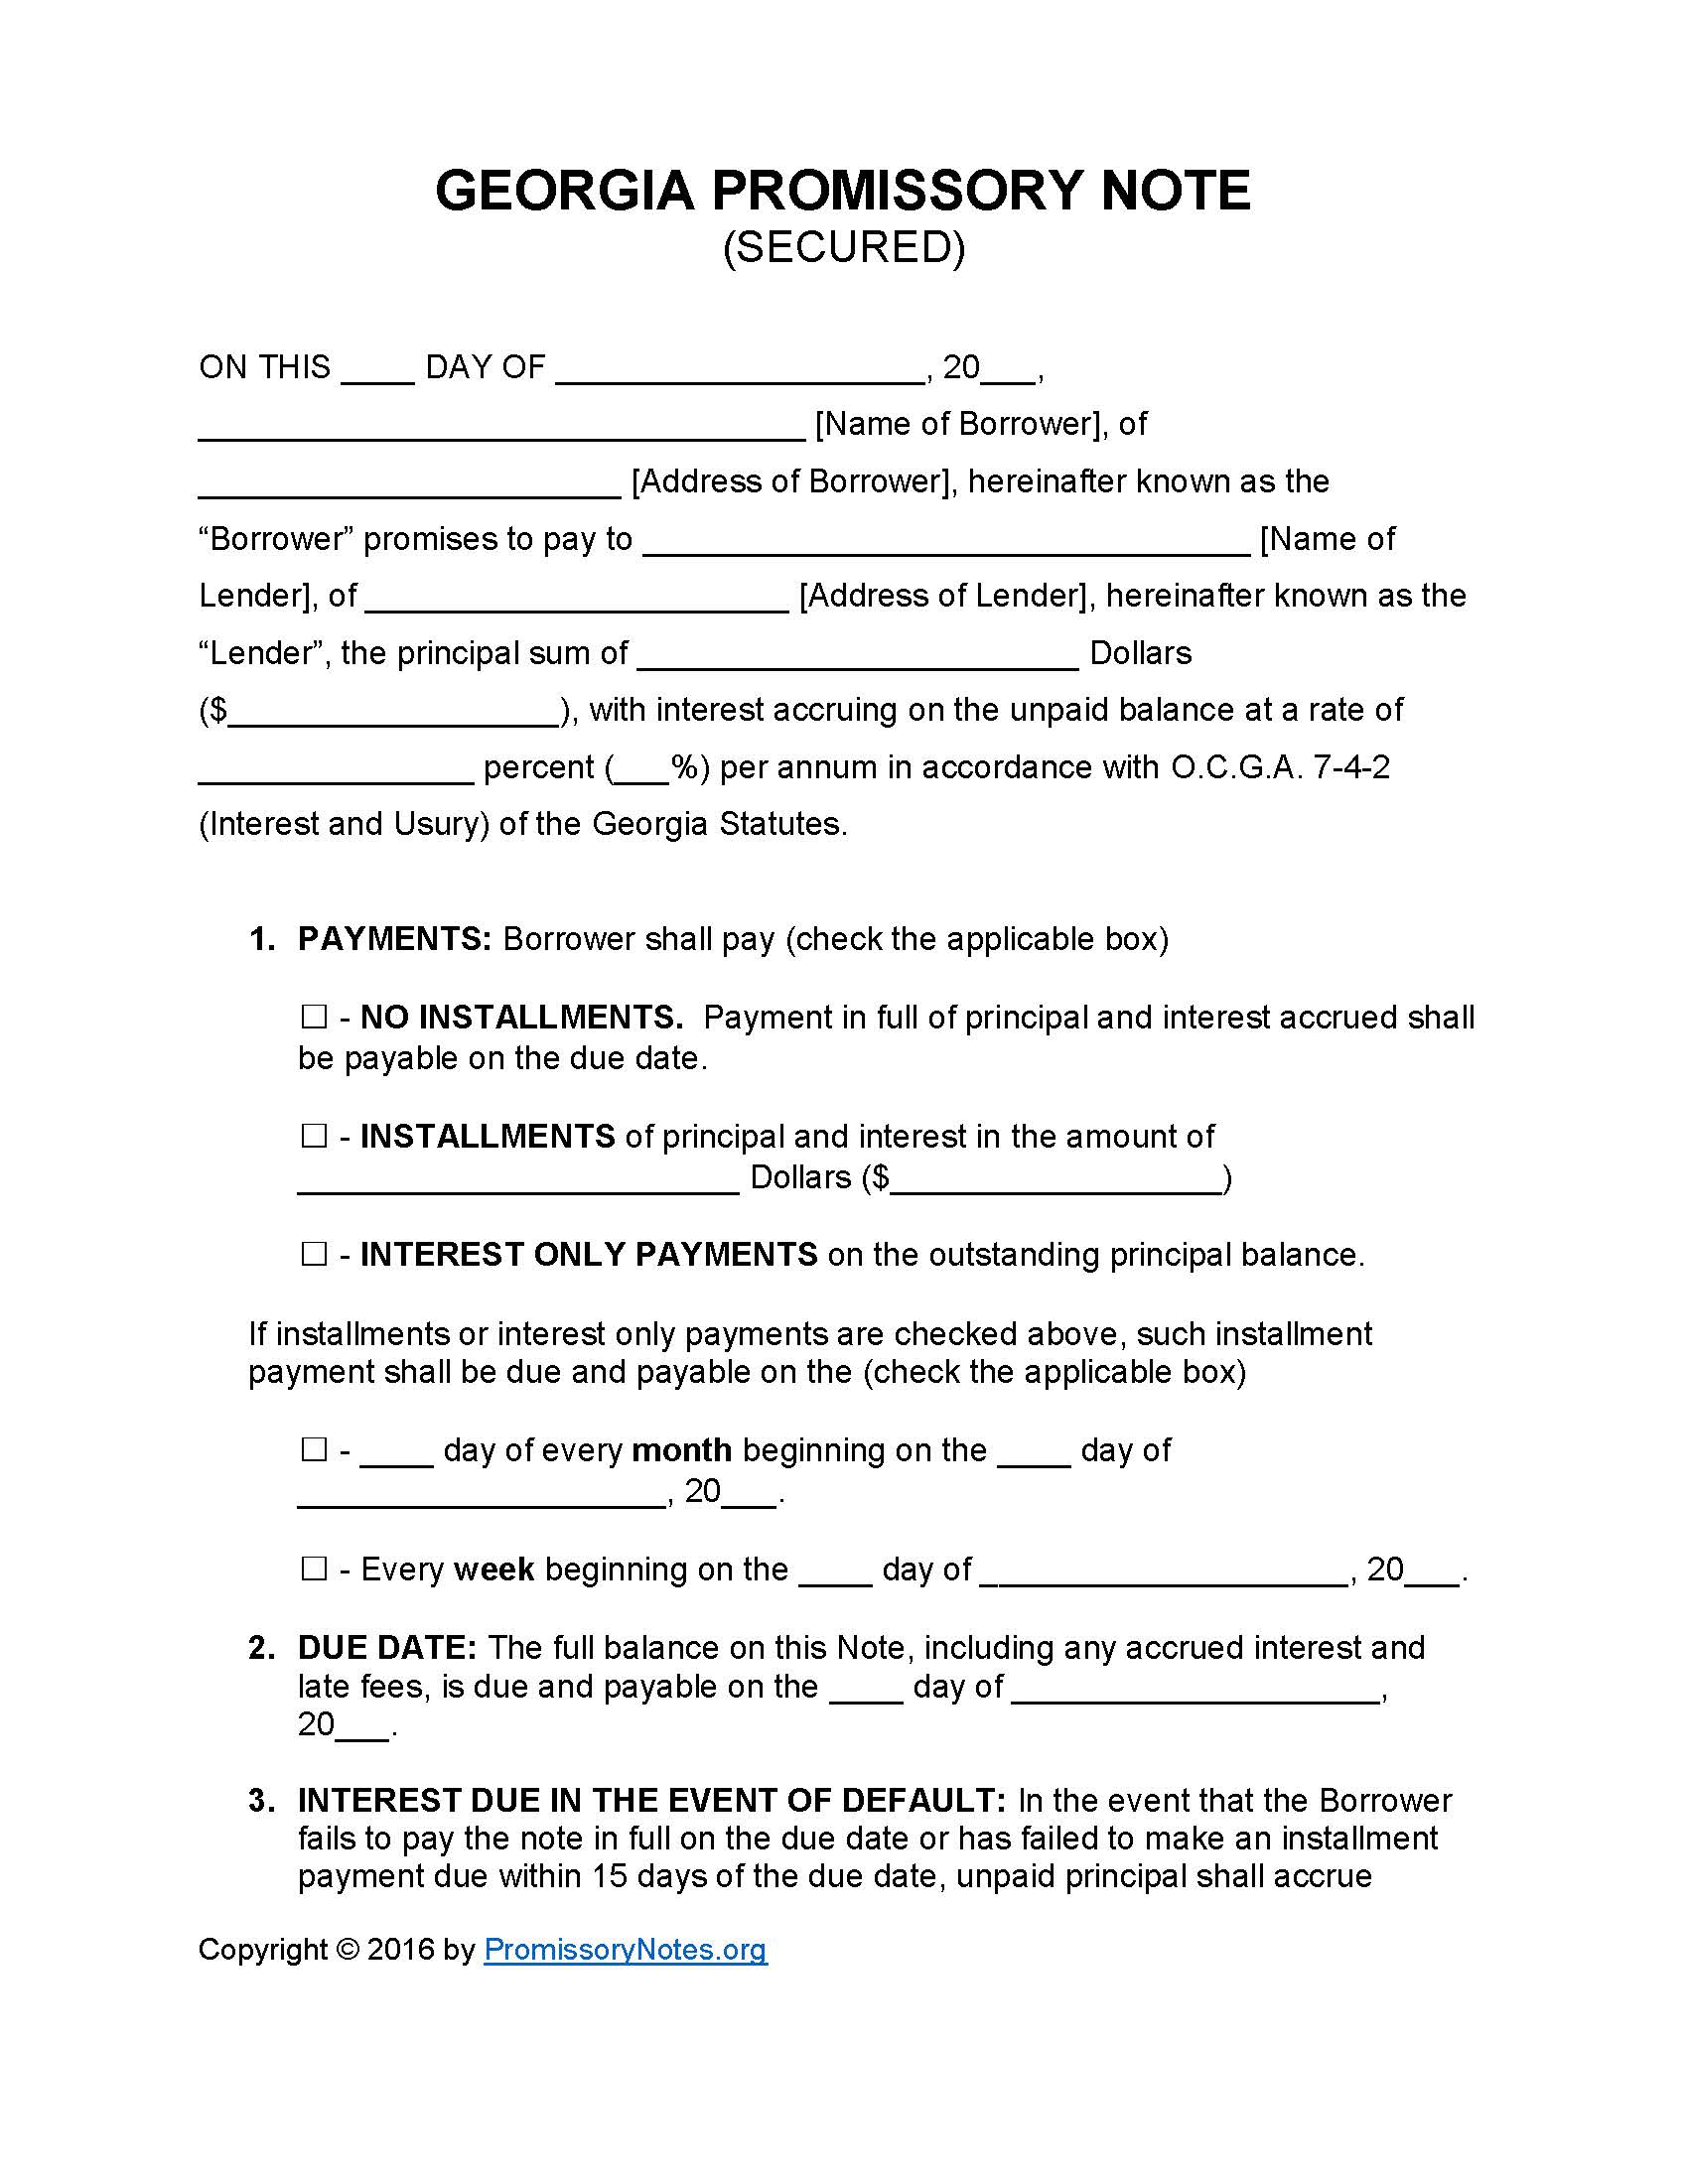 Georgia Secured Promissory Note Template - Promissory Notes Pertaining To promise to pay agreement template